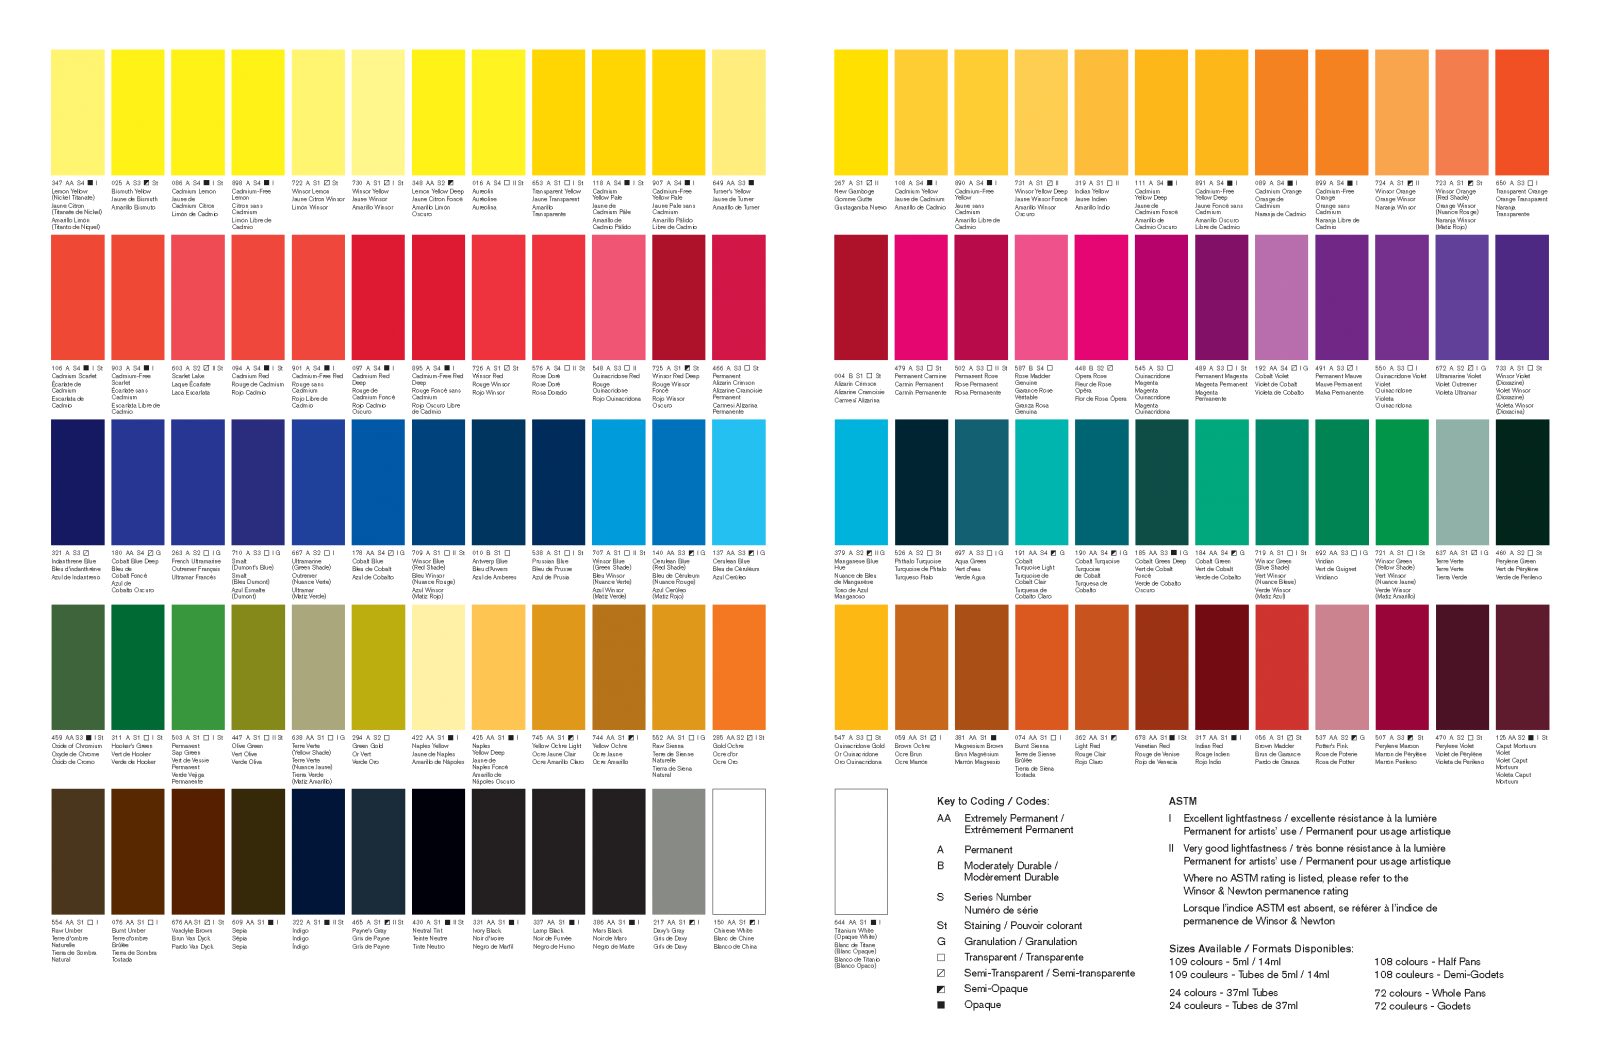 winsor and newton watercolor chart